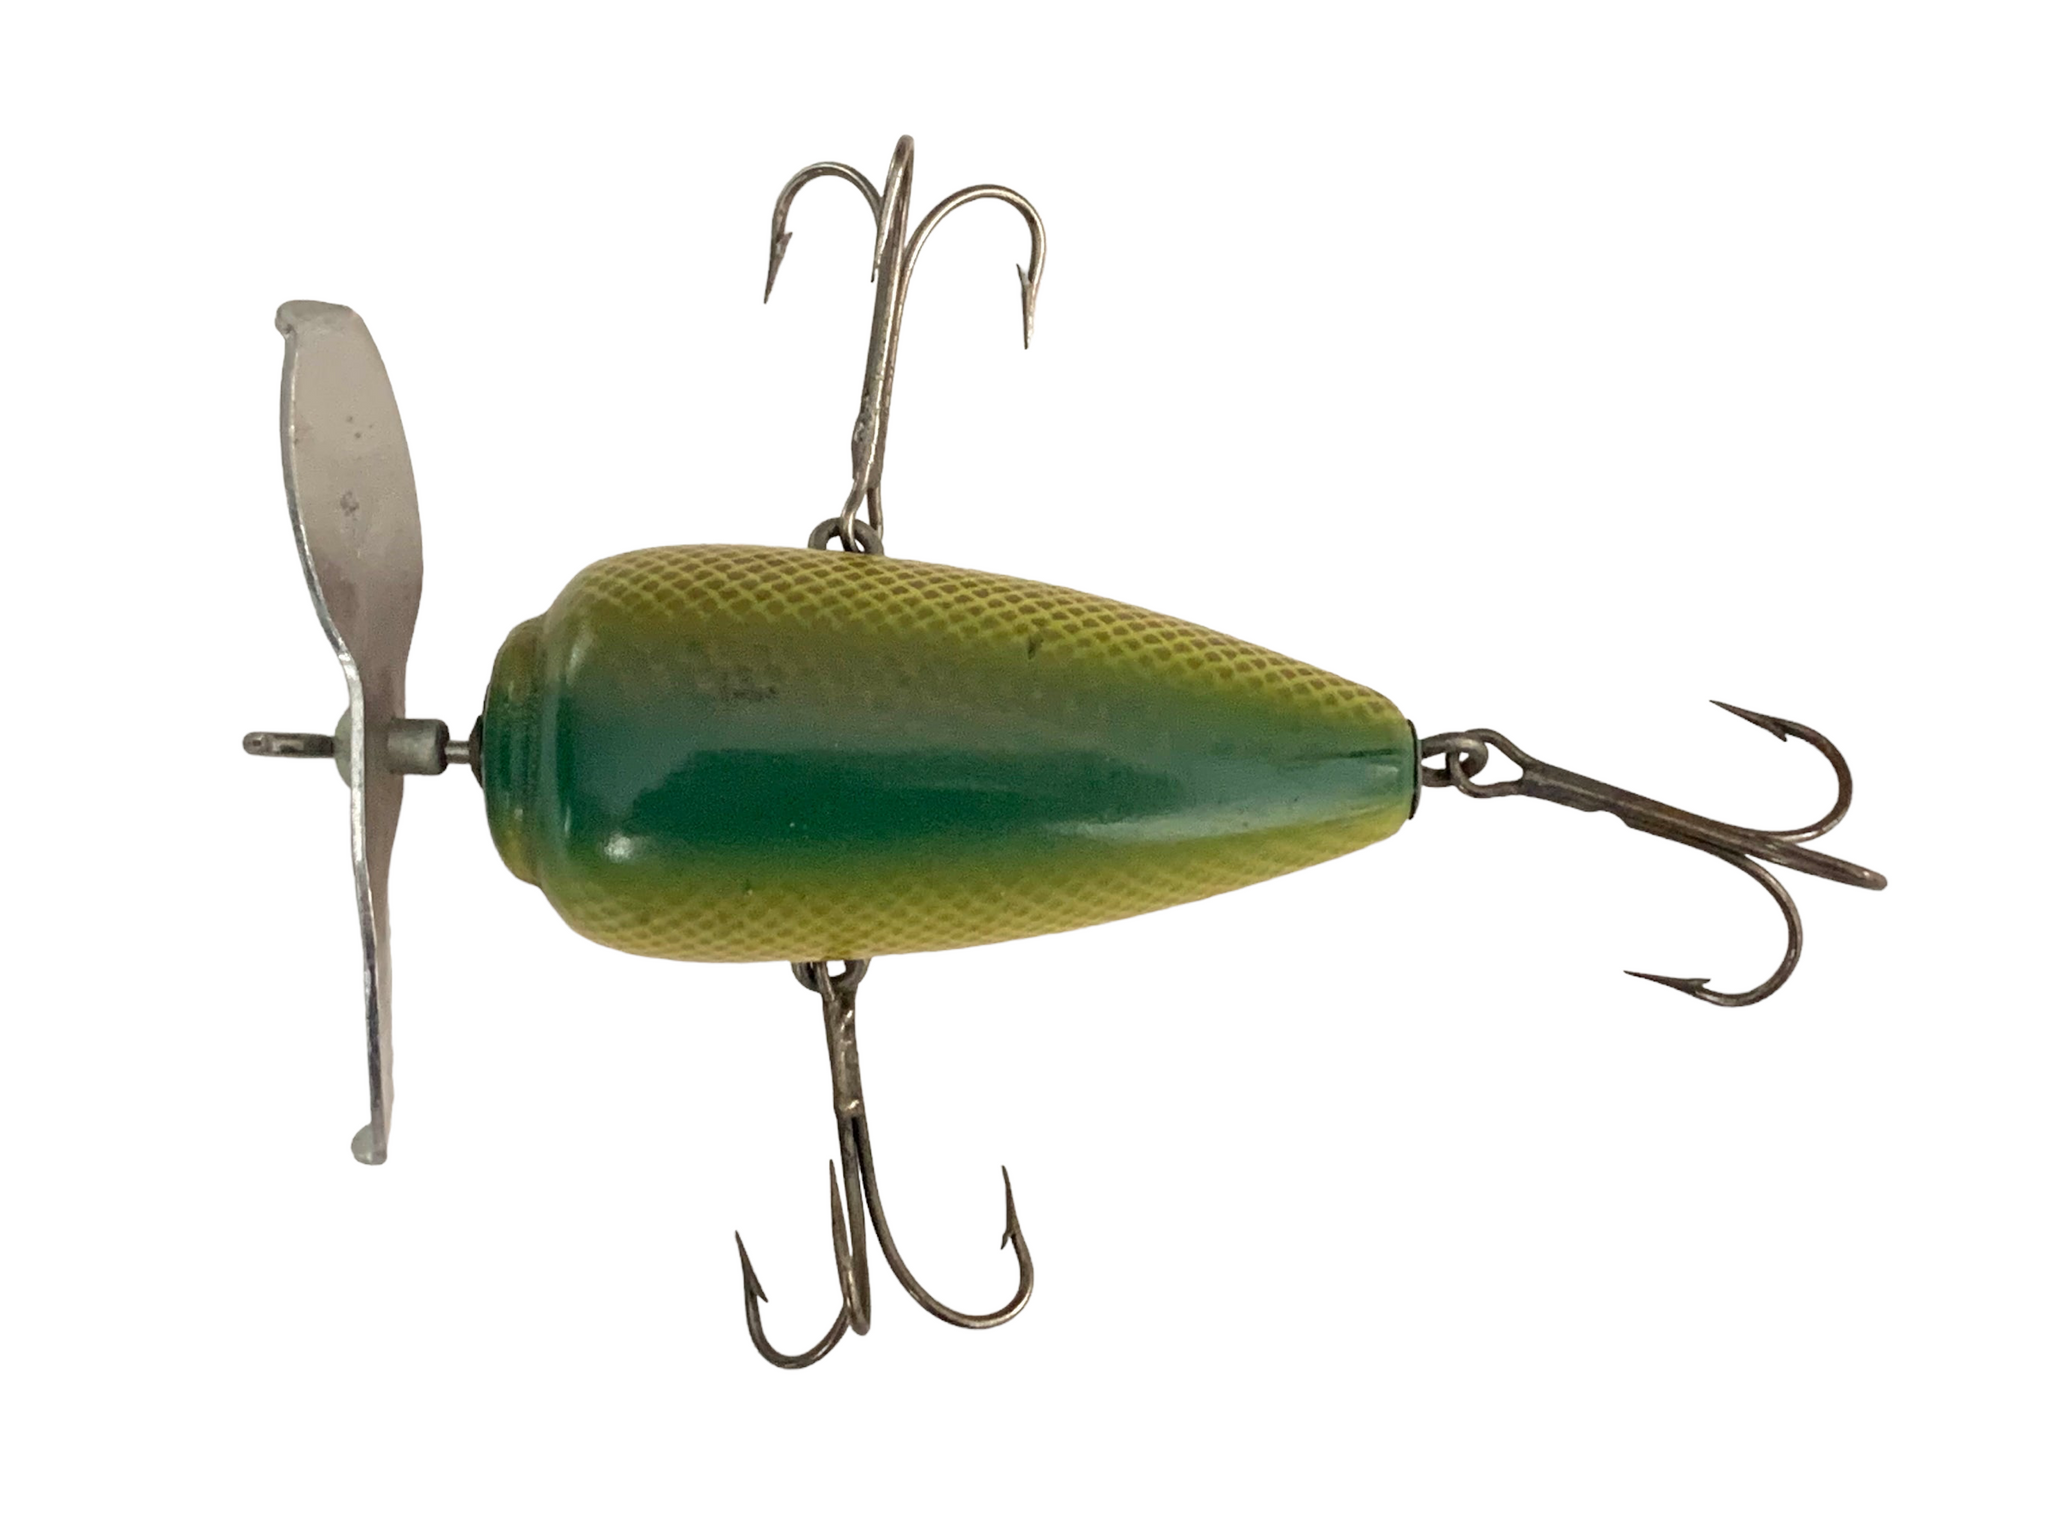 Jim Donaly • McCagg's BARNEY Wood Lure • SCALE (PERCH) – Toad Tackle